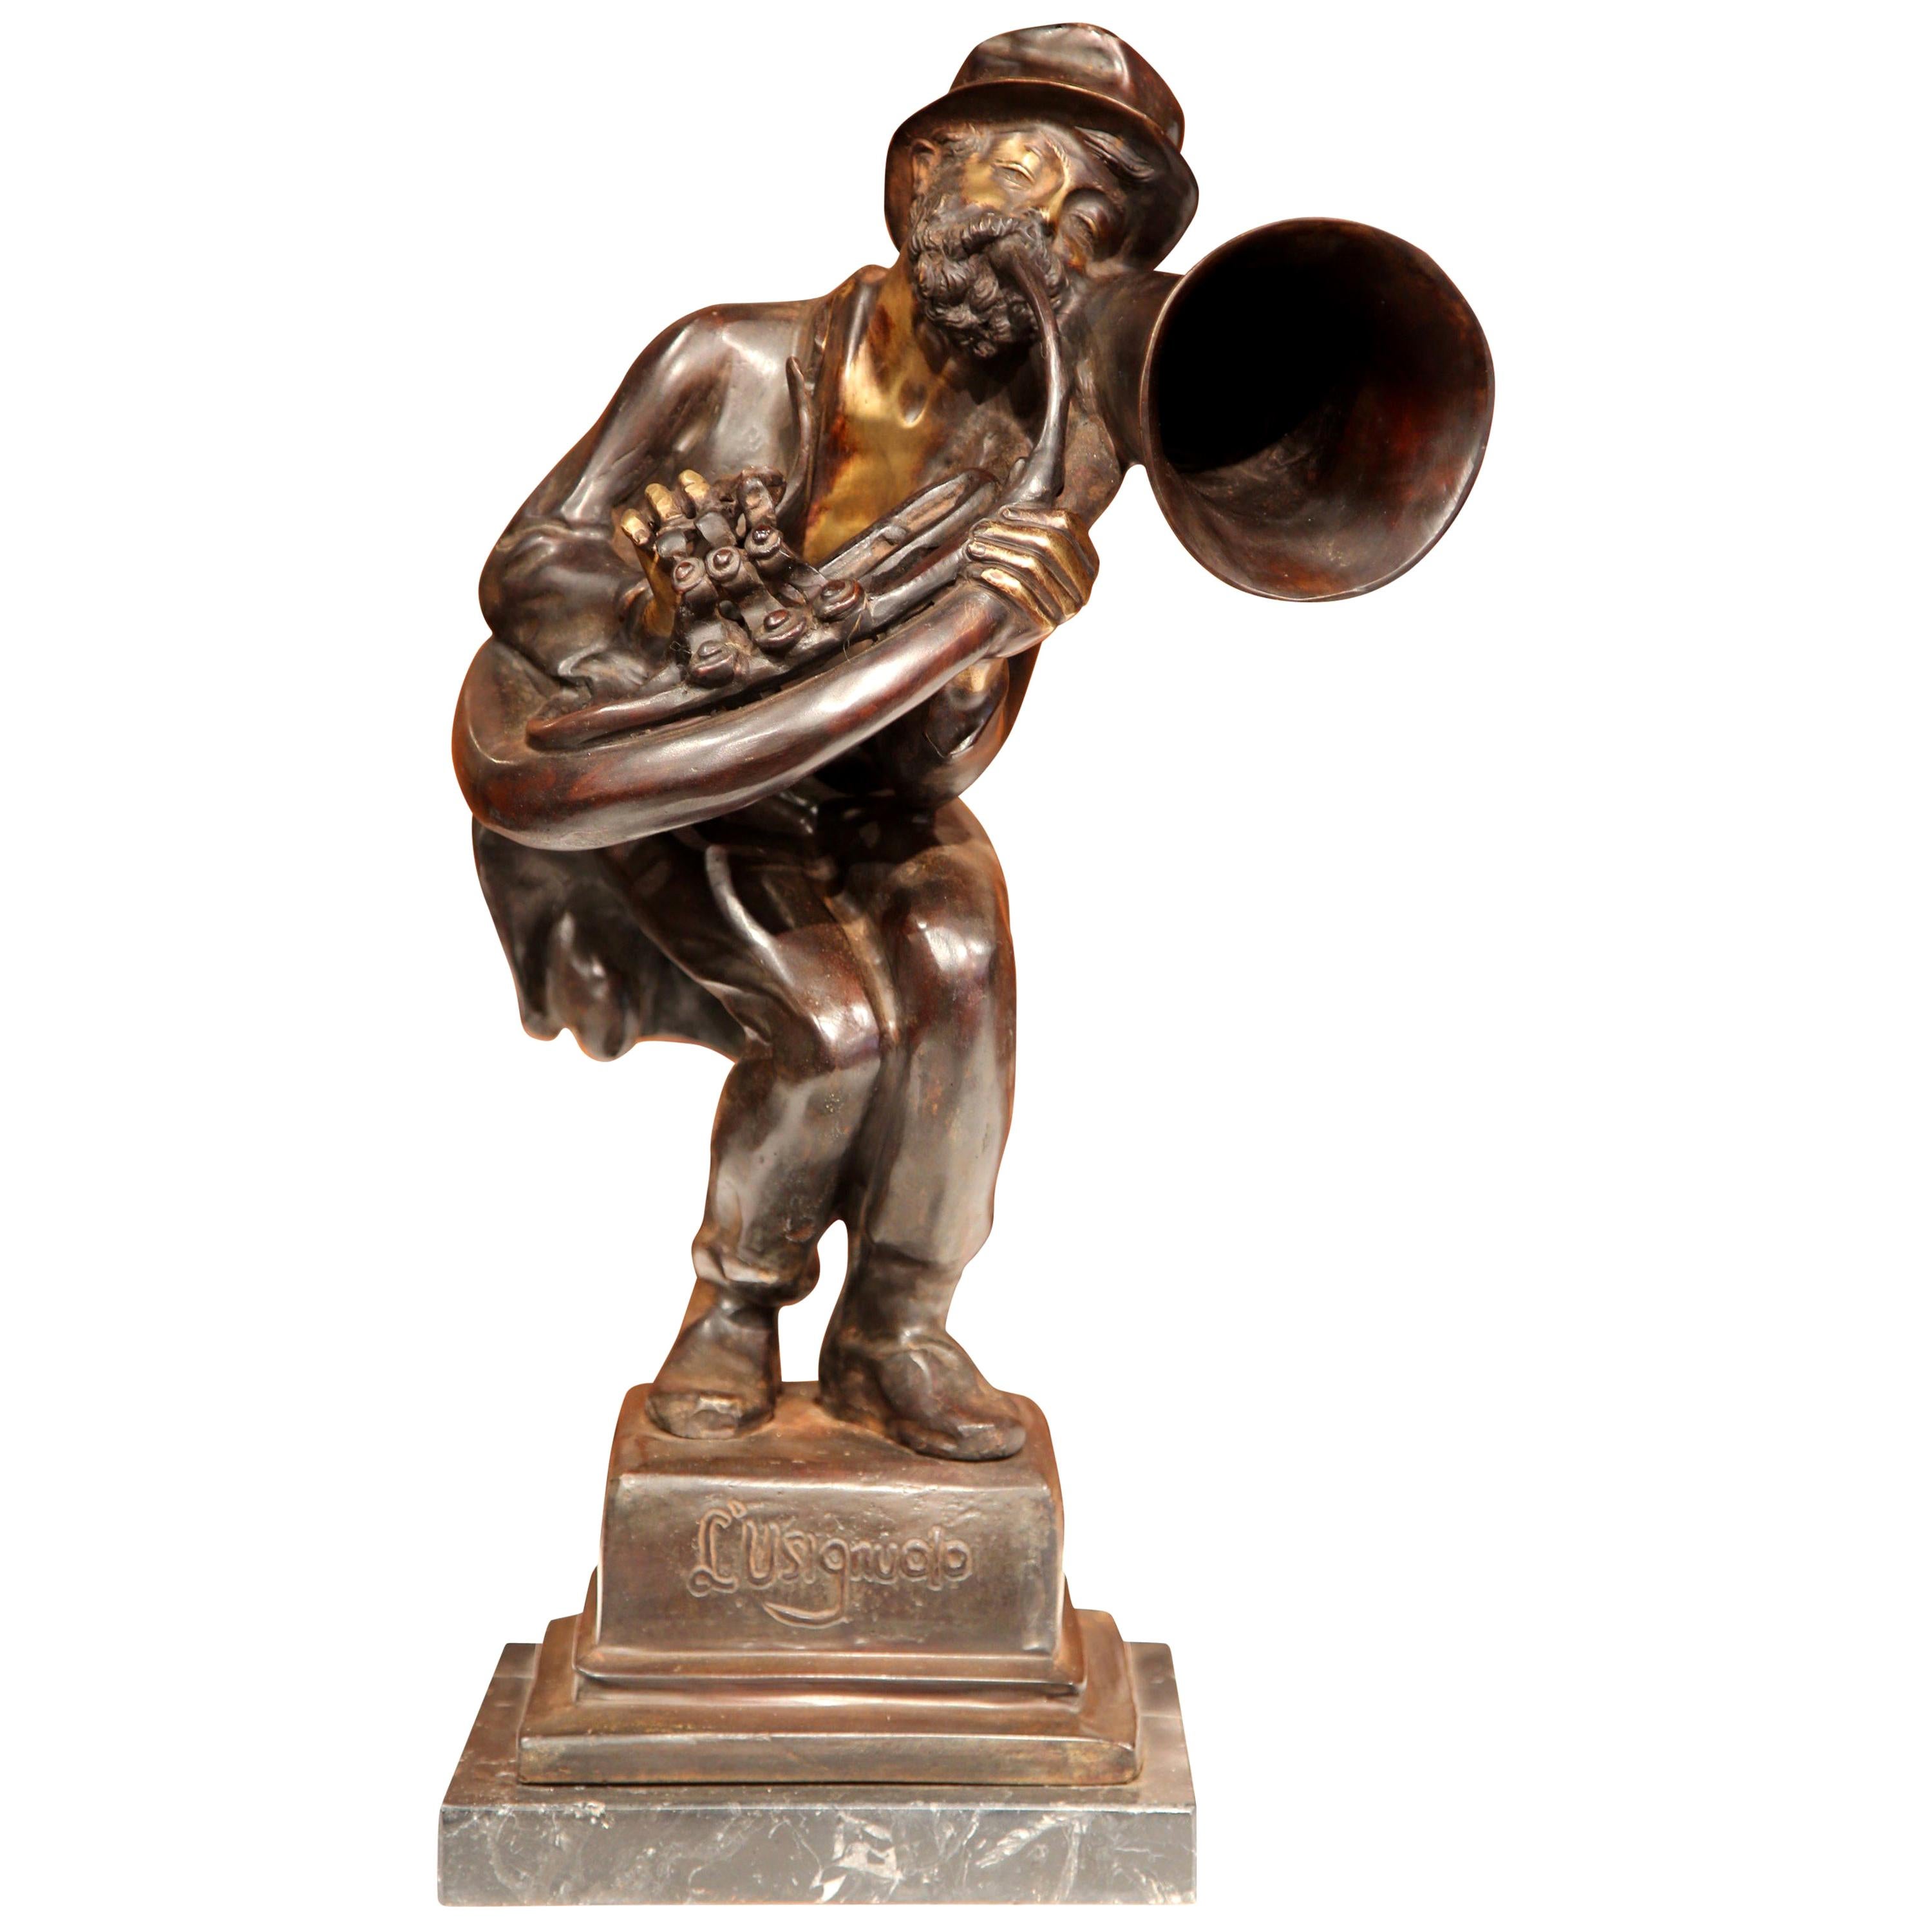 19th Century Italian Bronze Jazz Player Sculpture "L'usignuolo" Signed A. D’Orsi